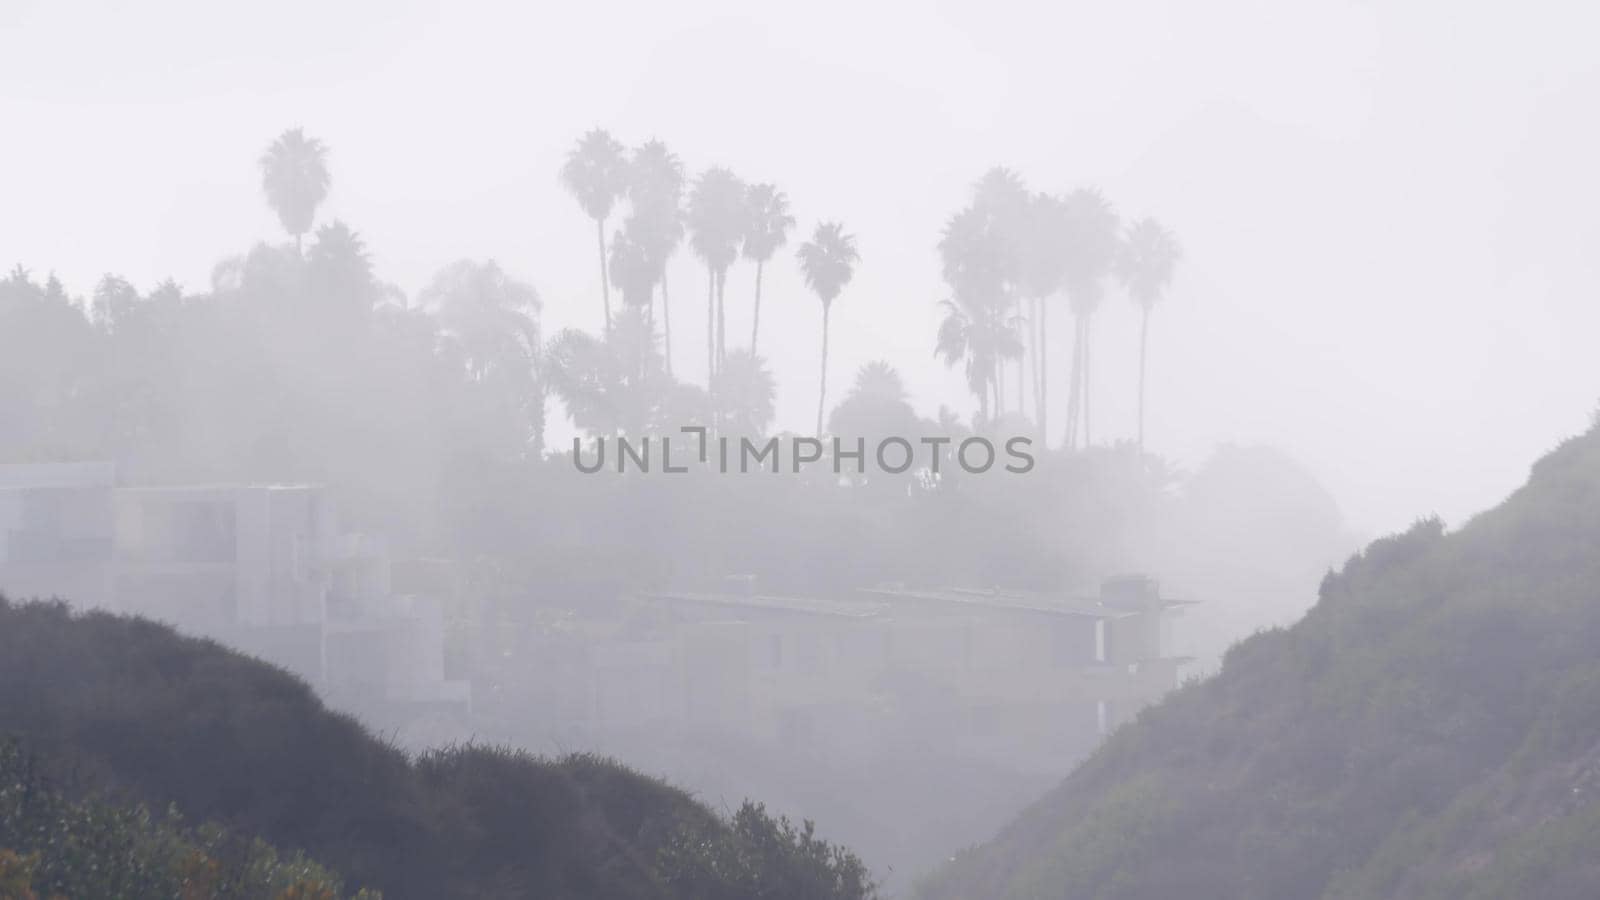 Palm trees on cliff or bluff, foggy weather, California coast, misty white air. by DogoraSun